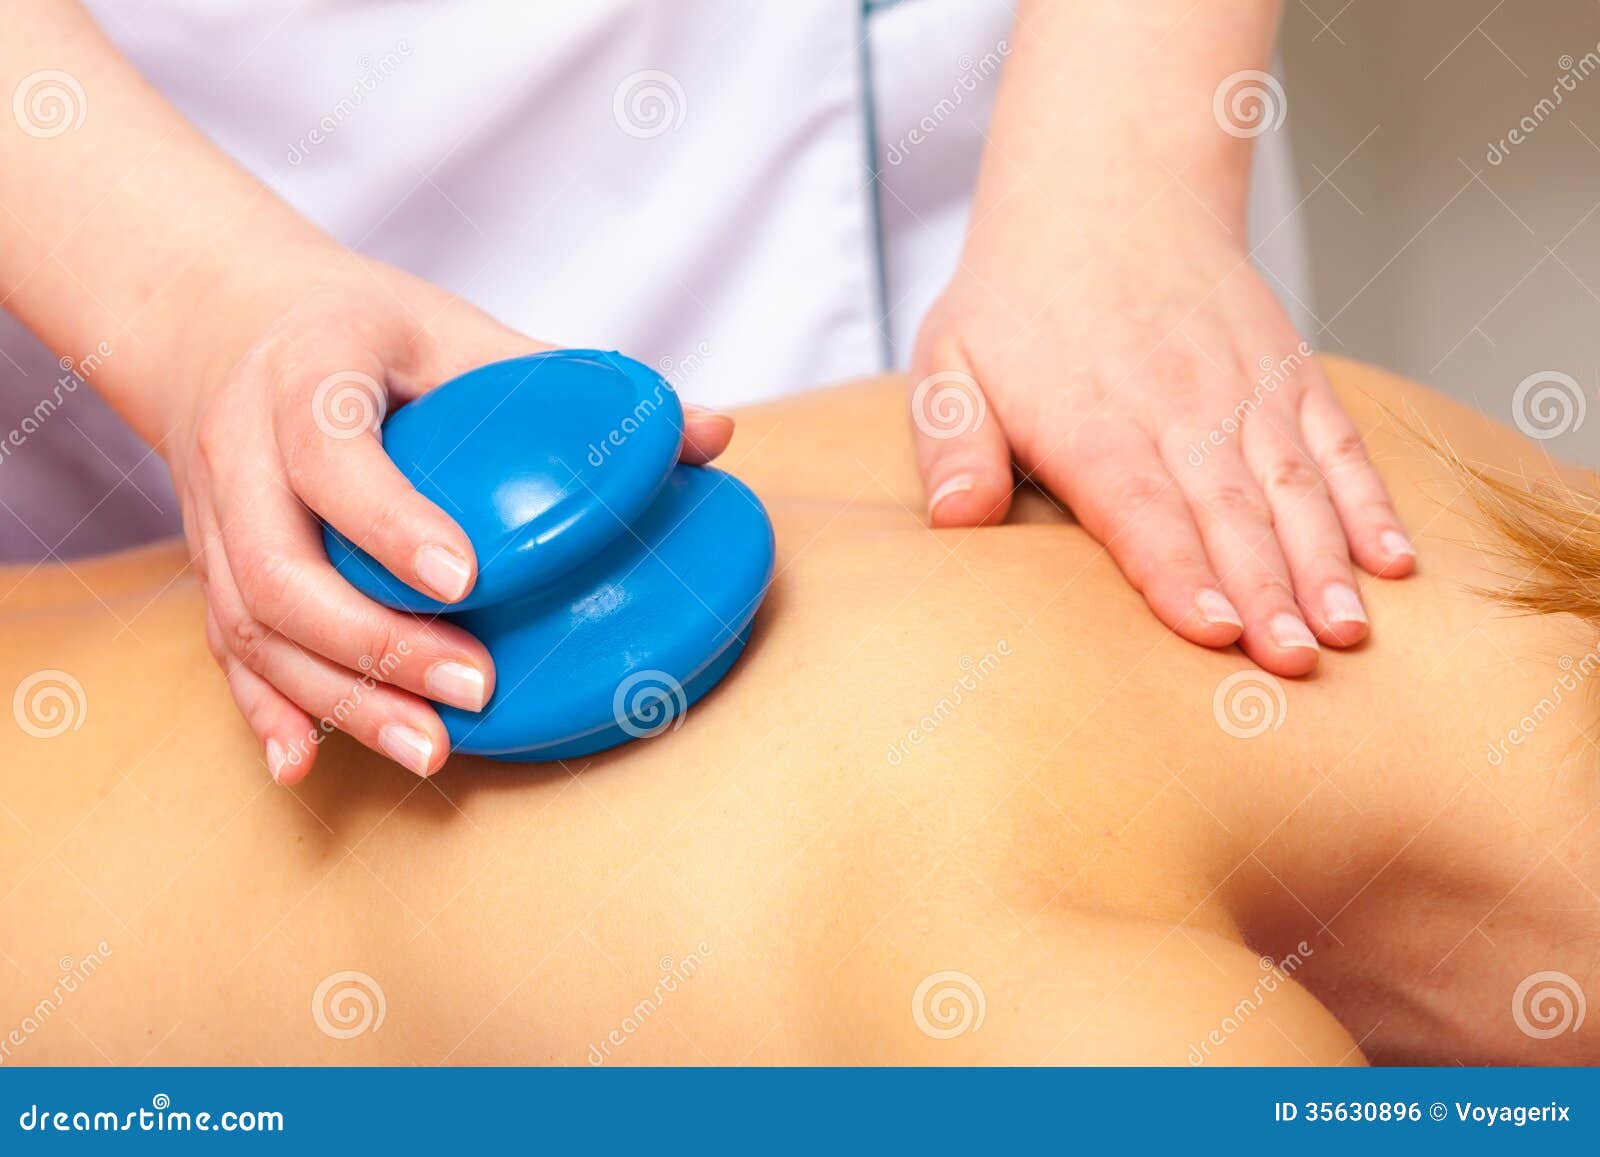 spa salon. woman relaxing having cupping-glass massage. bodycare.